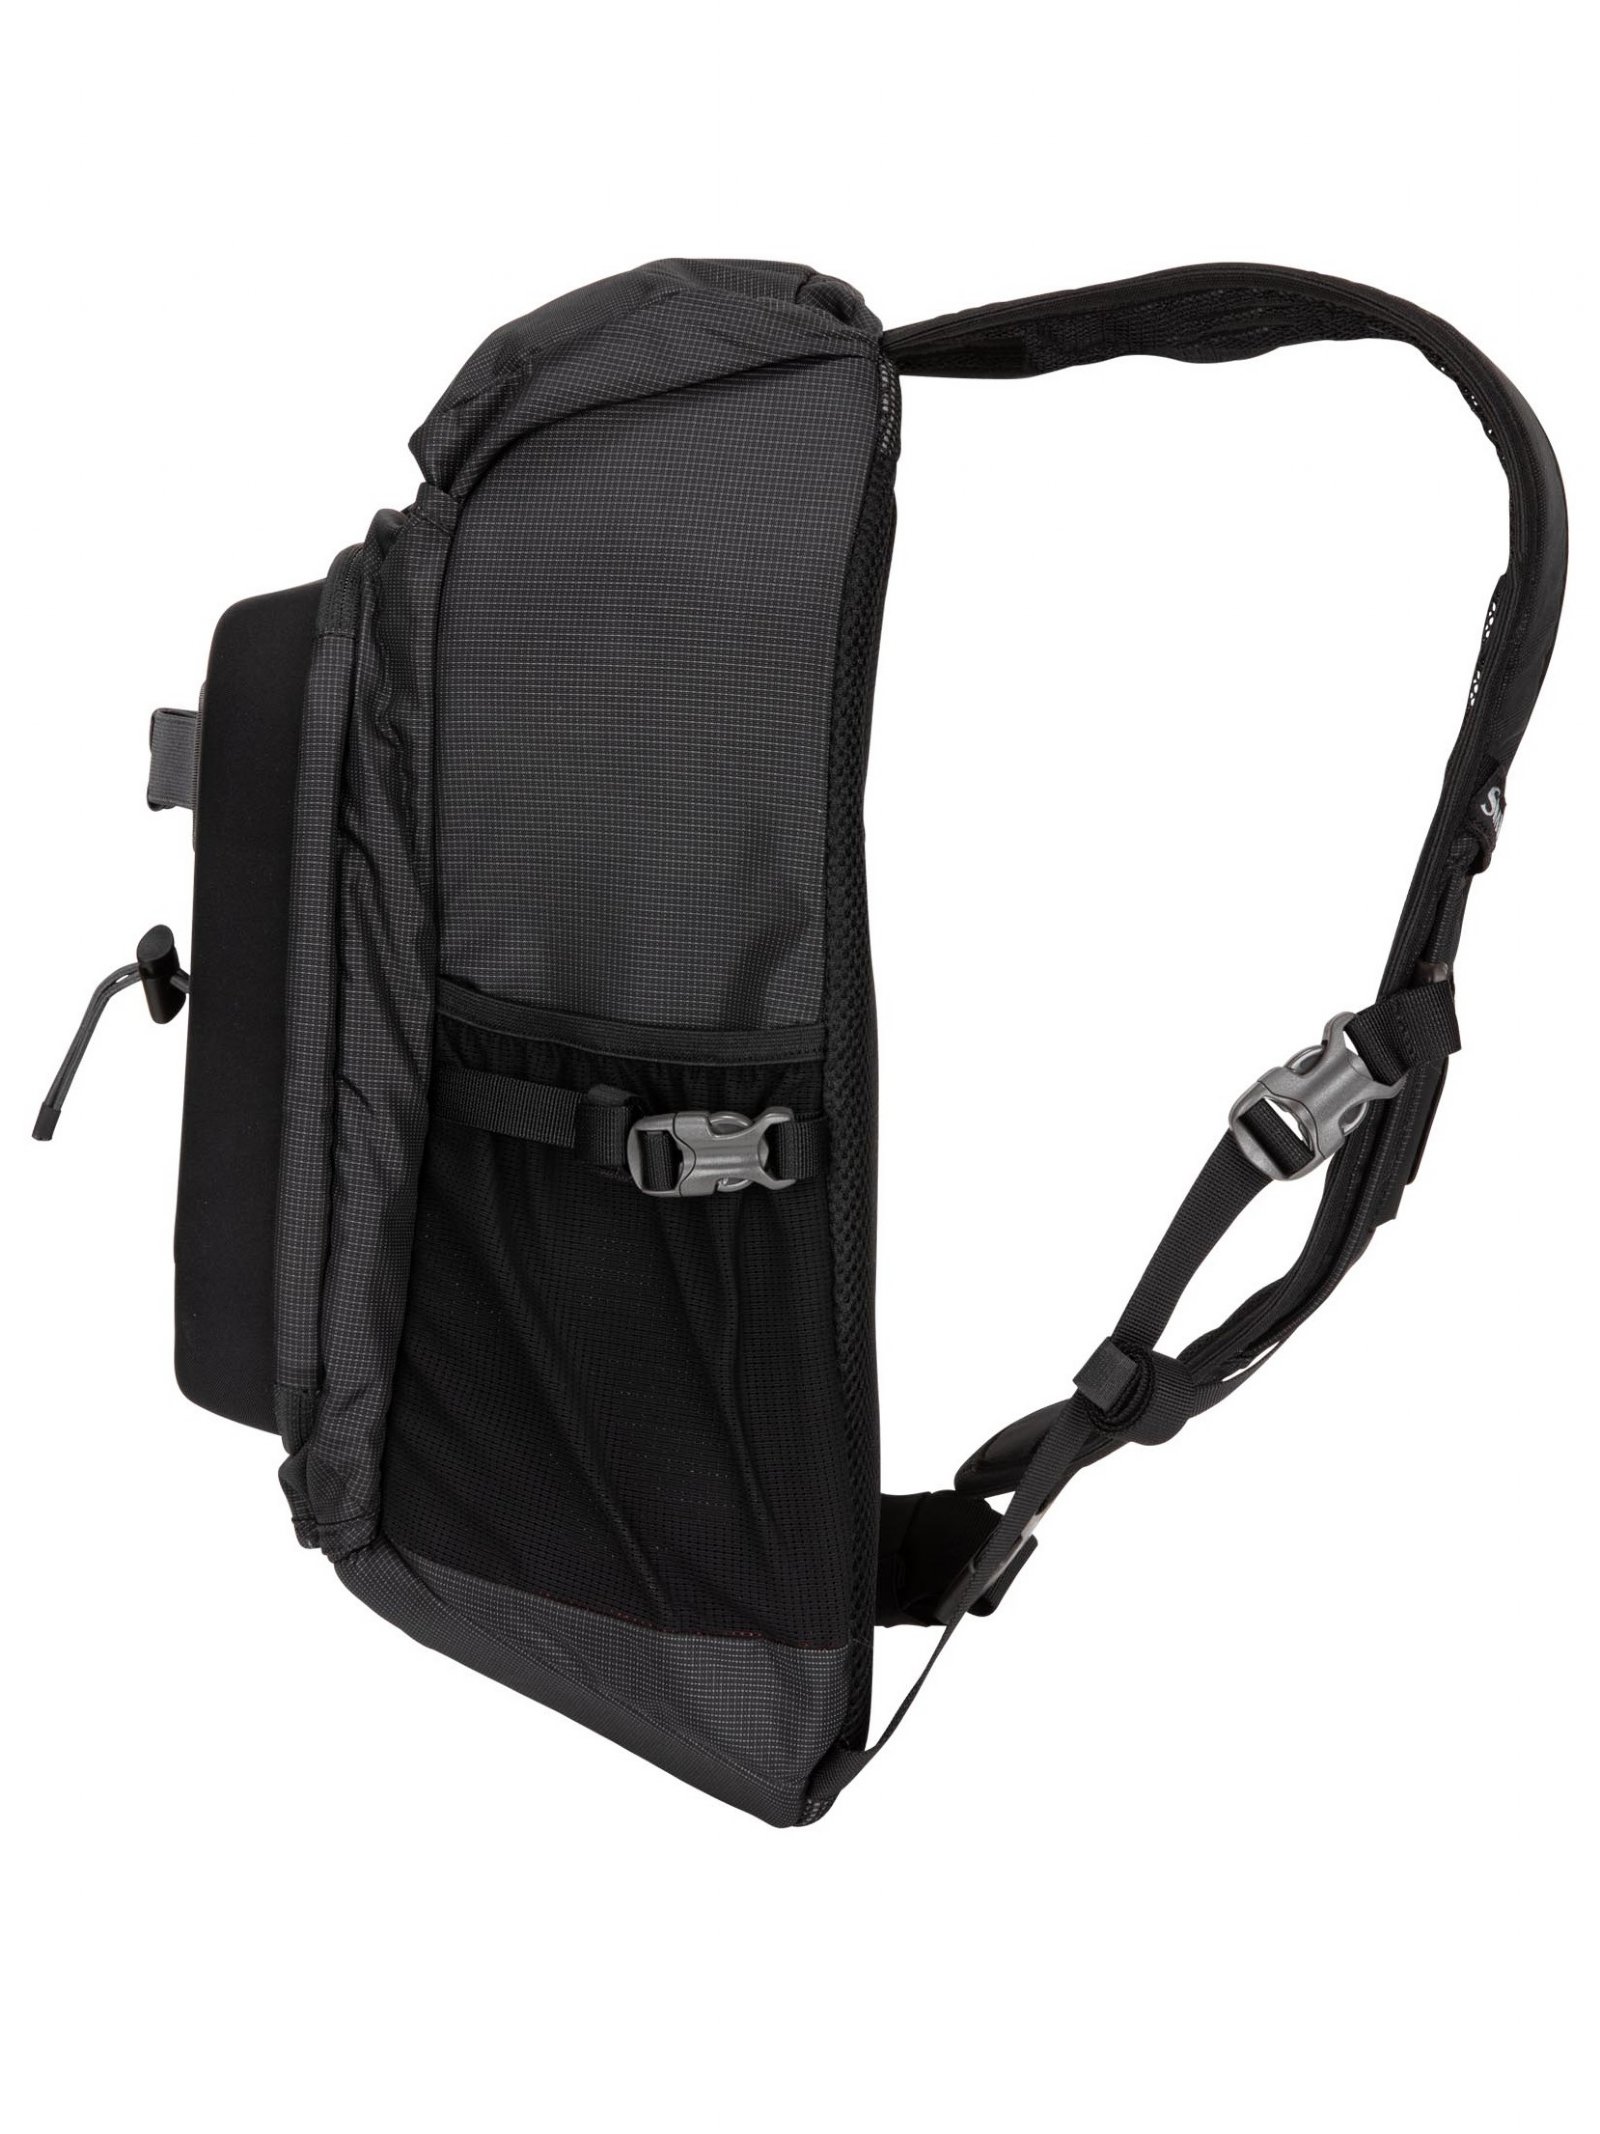 Simms Freestone Sling Pack, Simms Sling Pack For Sale Online